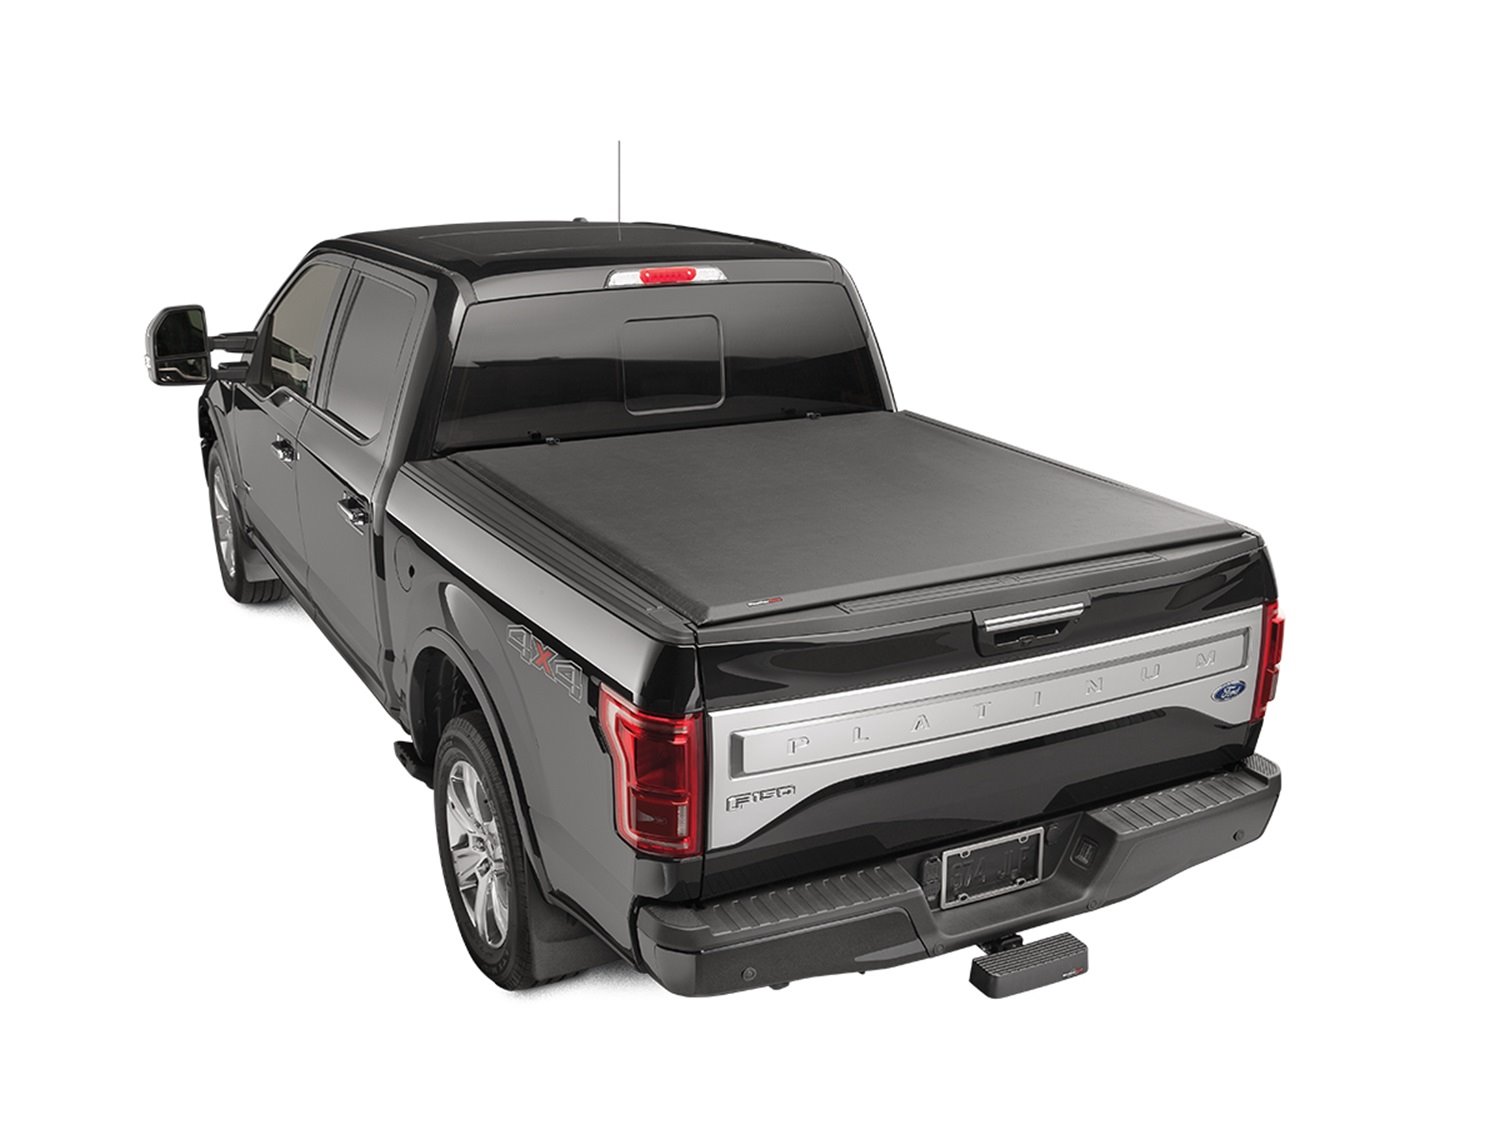 ROLL UP TRUCK BED COVER B CHEVROLET SILVERADO 2007-2013 FULL SIZE 5 8 BED W OR W/O CARGO RAILS